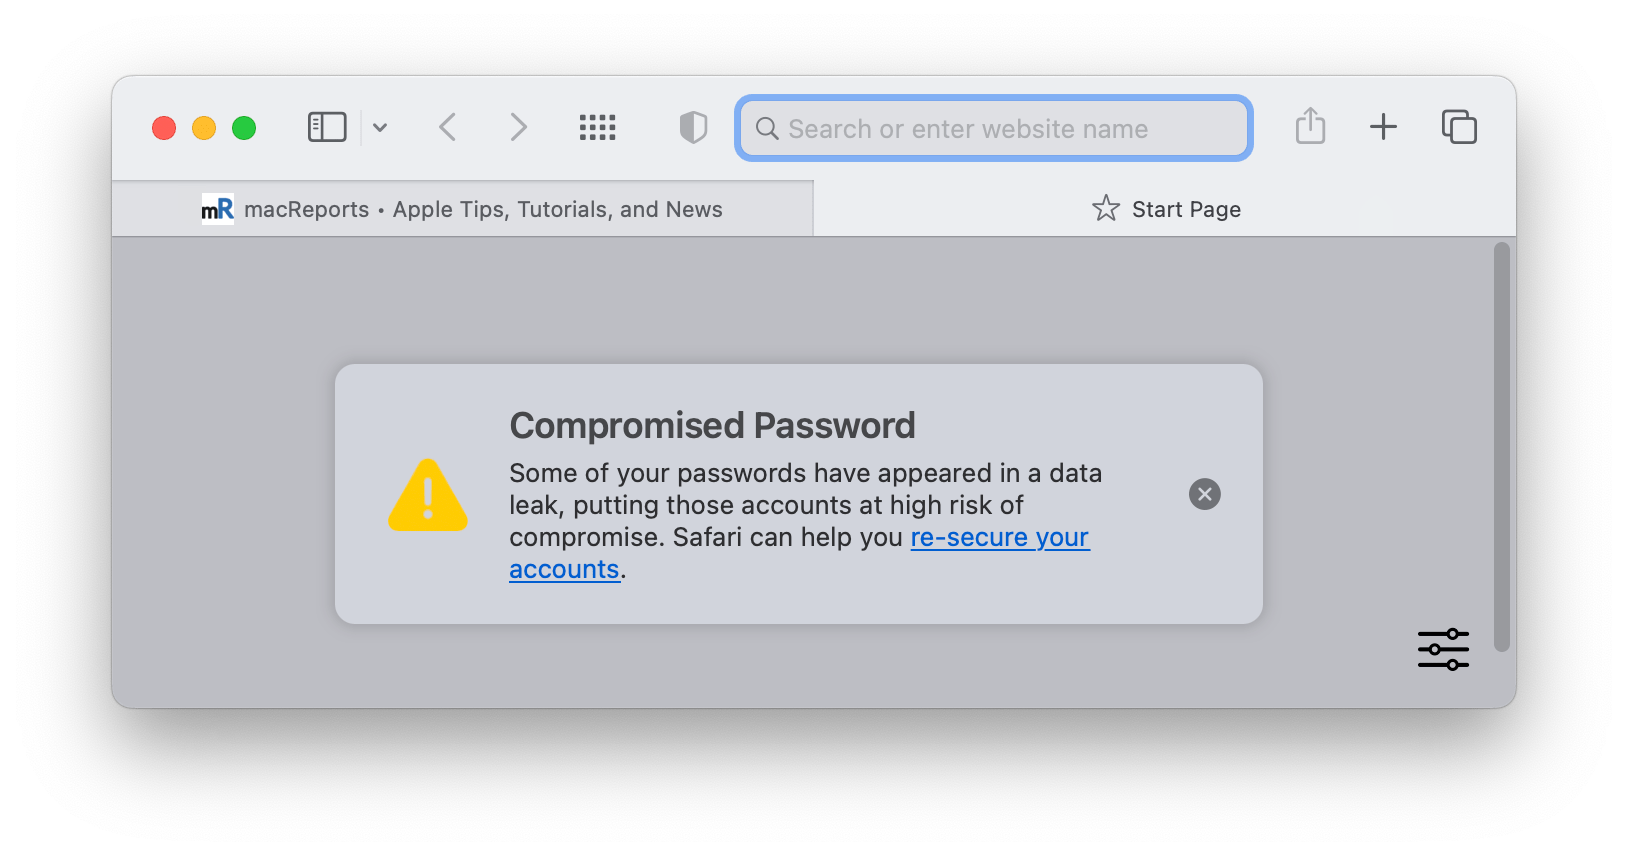 compromised password message in Safari. Password have appeared in a data leak.